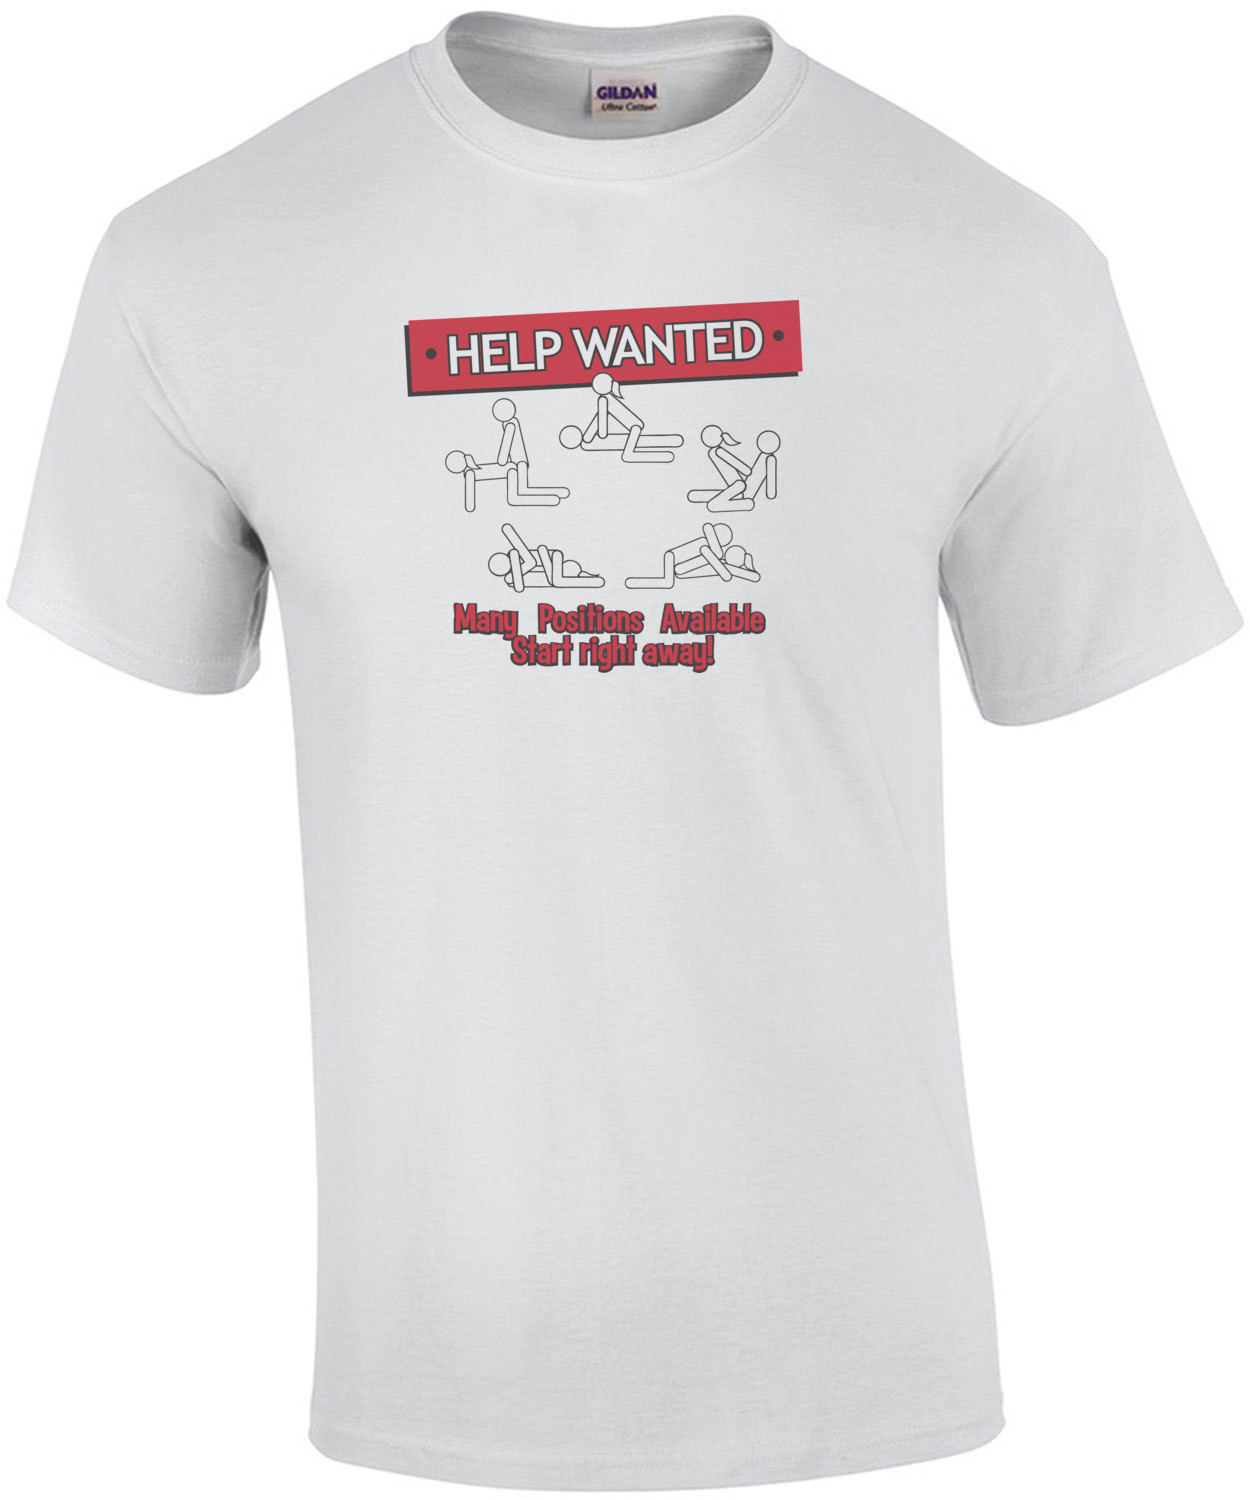 Help Wanted Many Positions Available Funny T-shirt